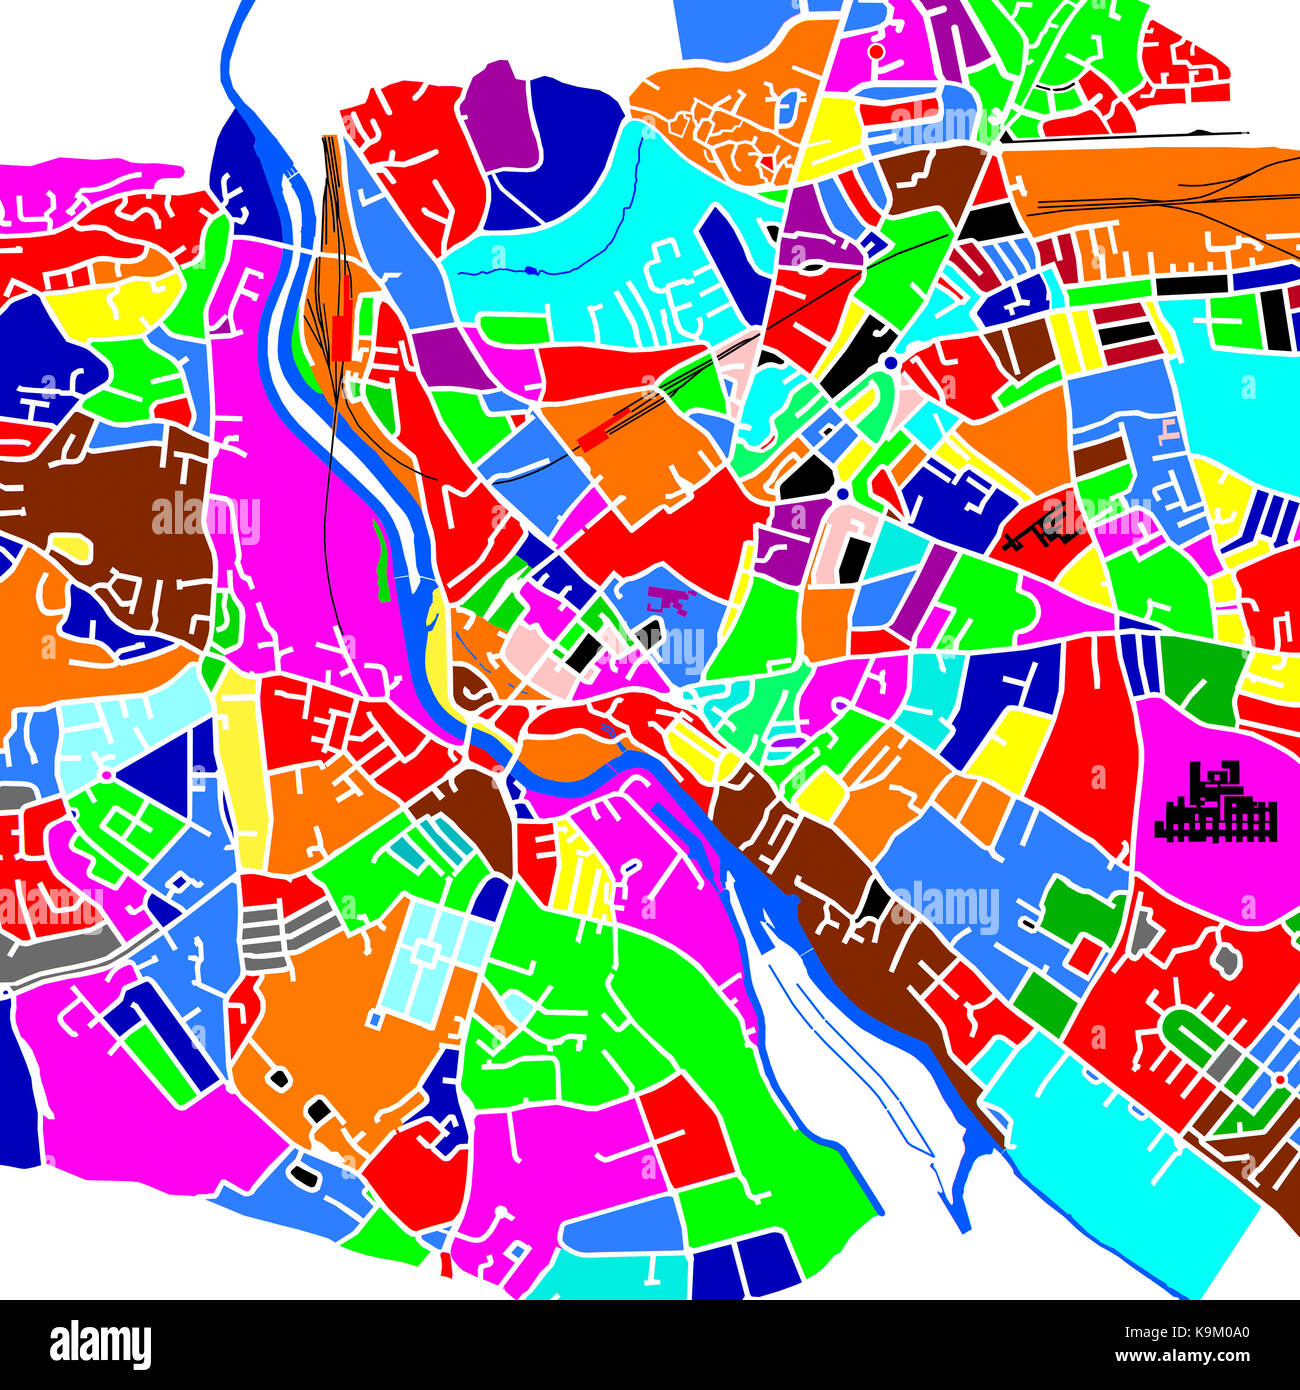 Colourful Graphic Representation of a Map of Exeter Stock Photo